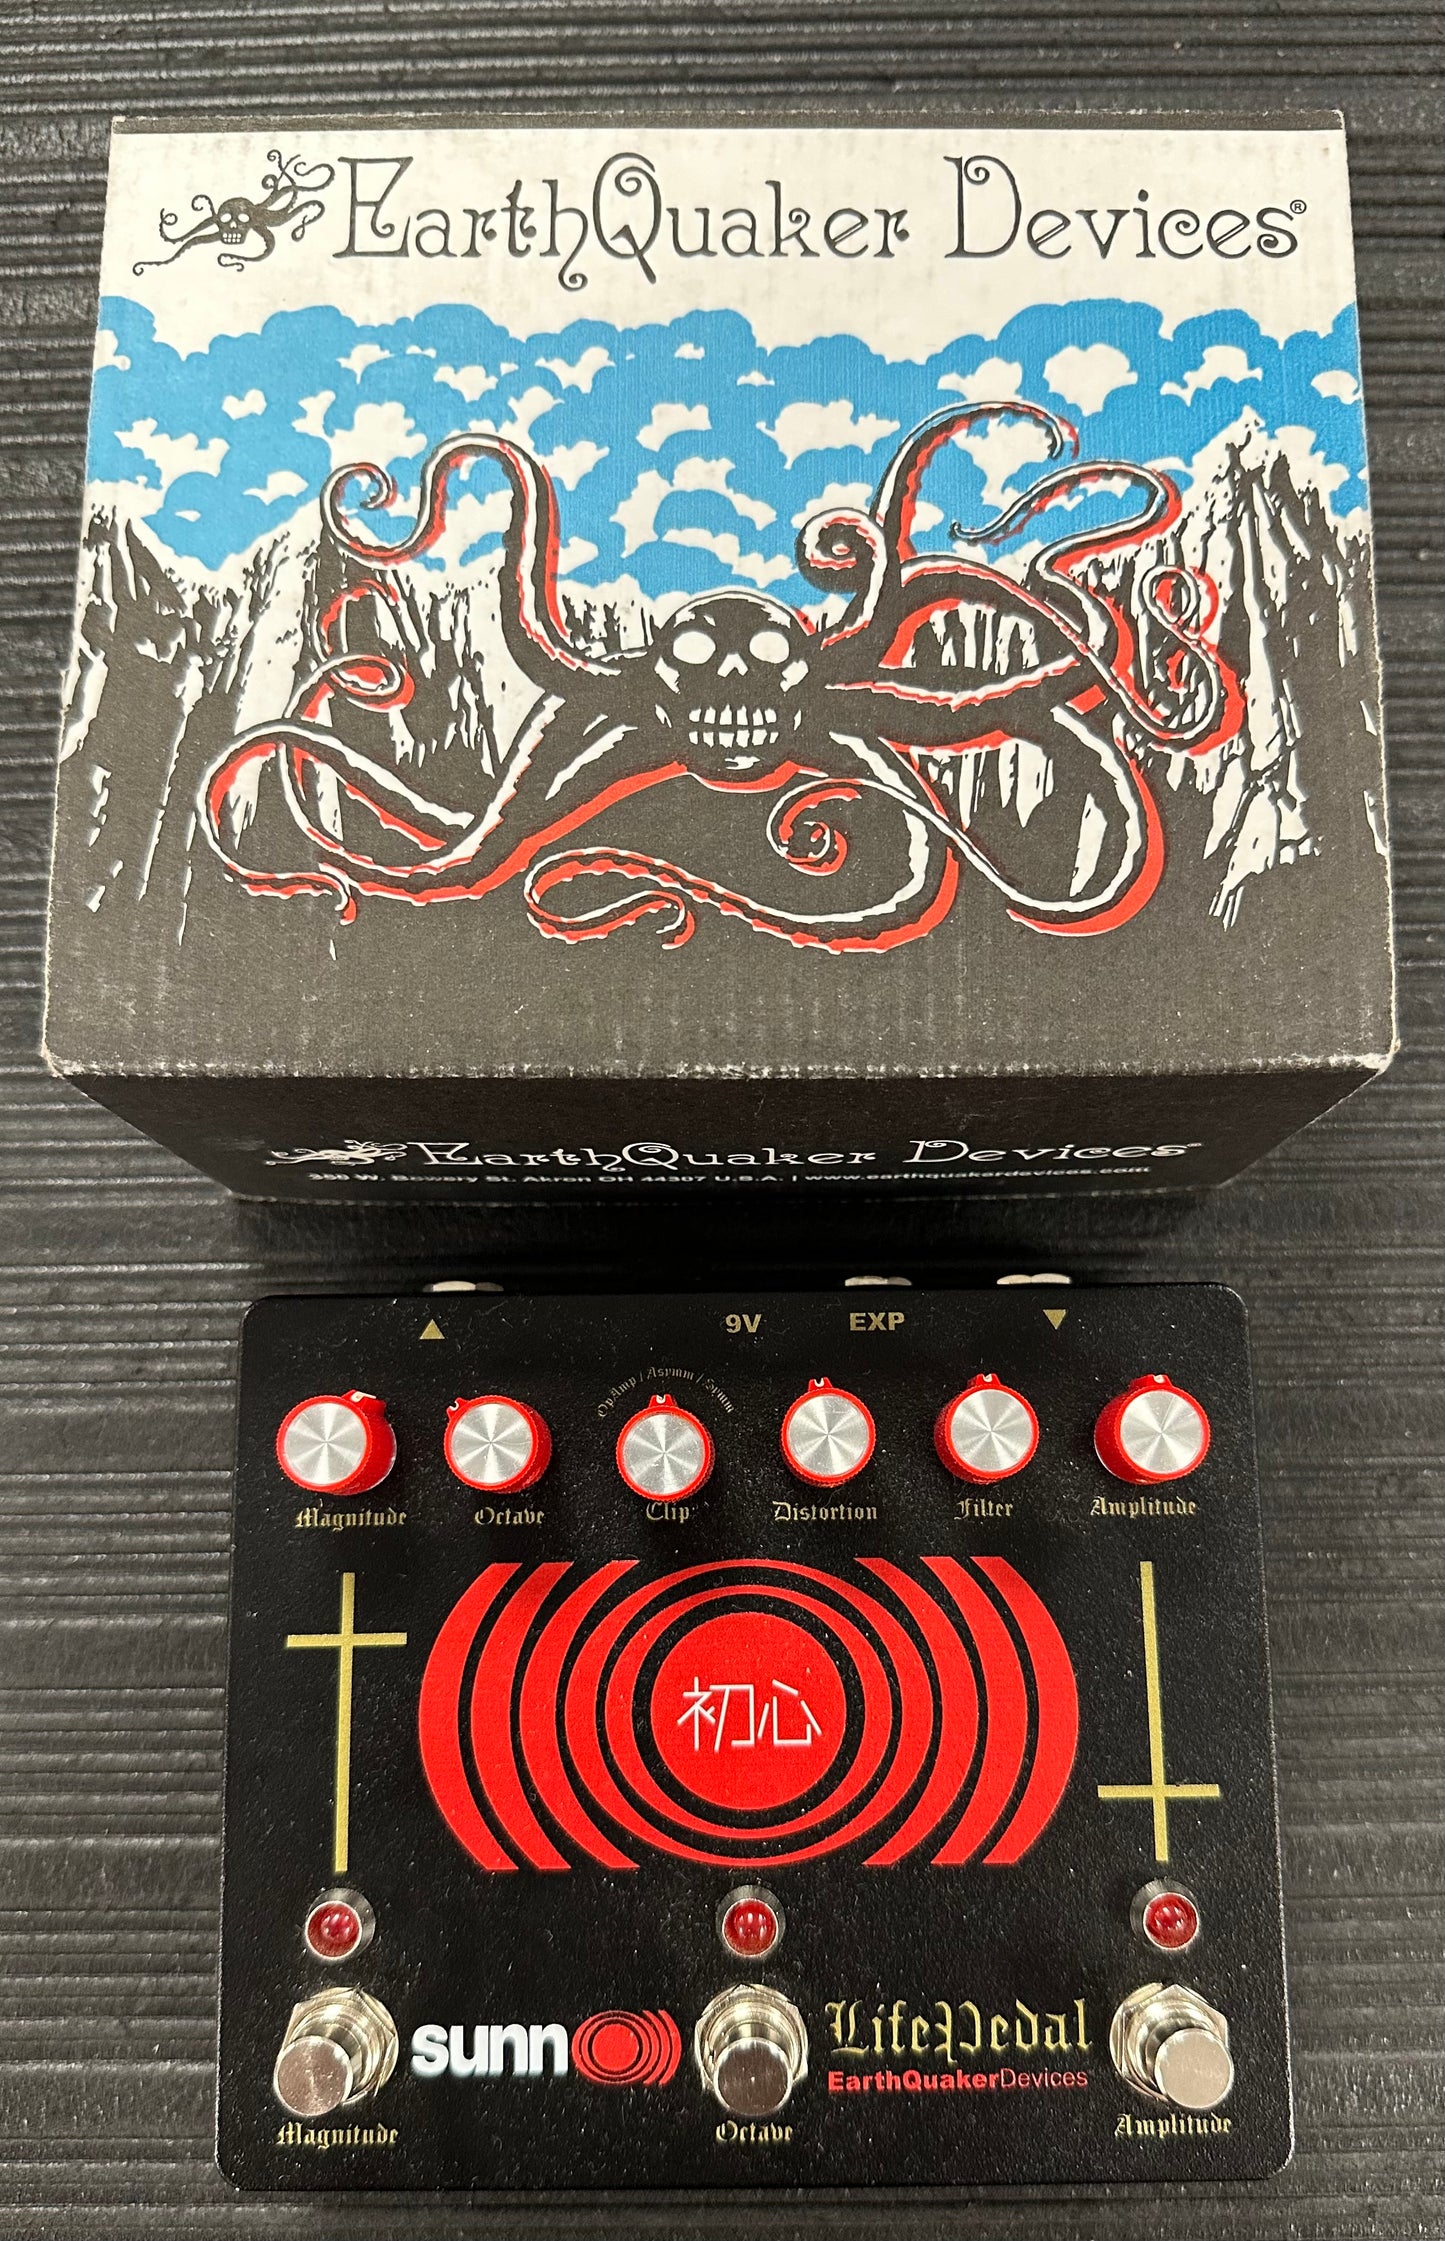 Top with box of Used EarthQuaker Devices Life Pedal Distortion & Boost w/Octave Pedal w/box TSS3858